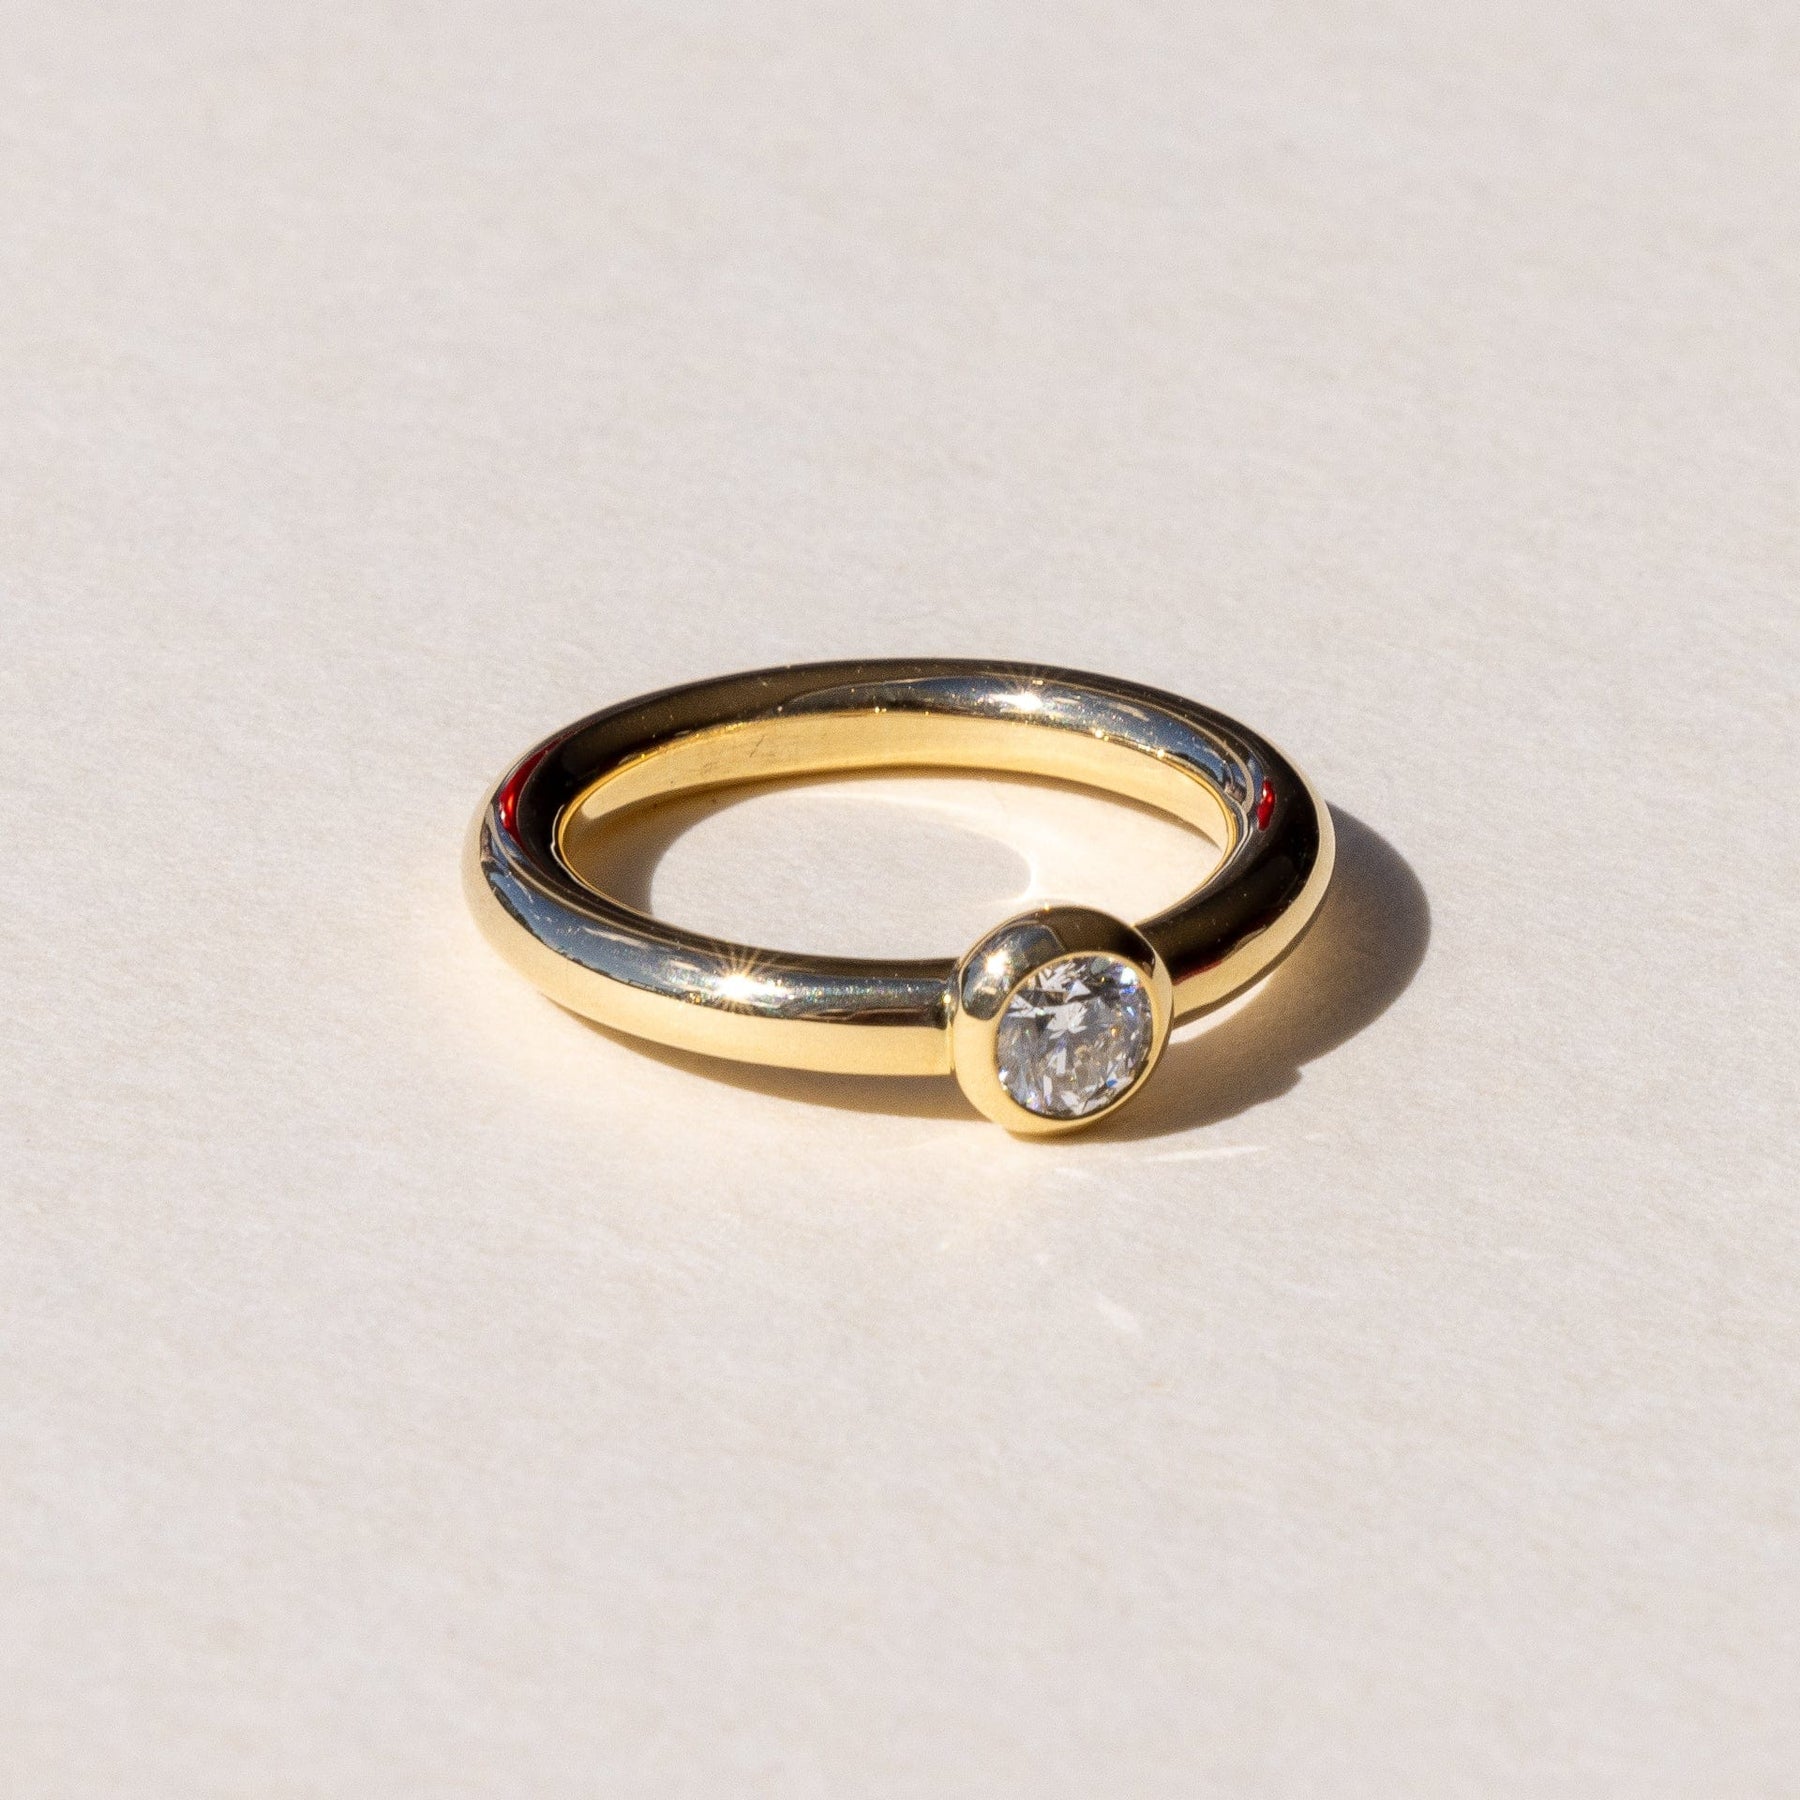 Heavy 9ct Yellow Gold Diamond Solitaire made by Meaden Master Jewellers